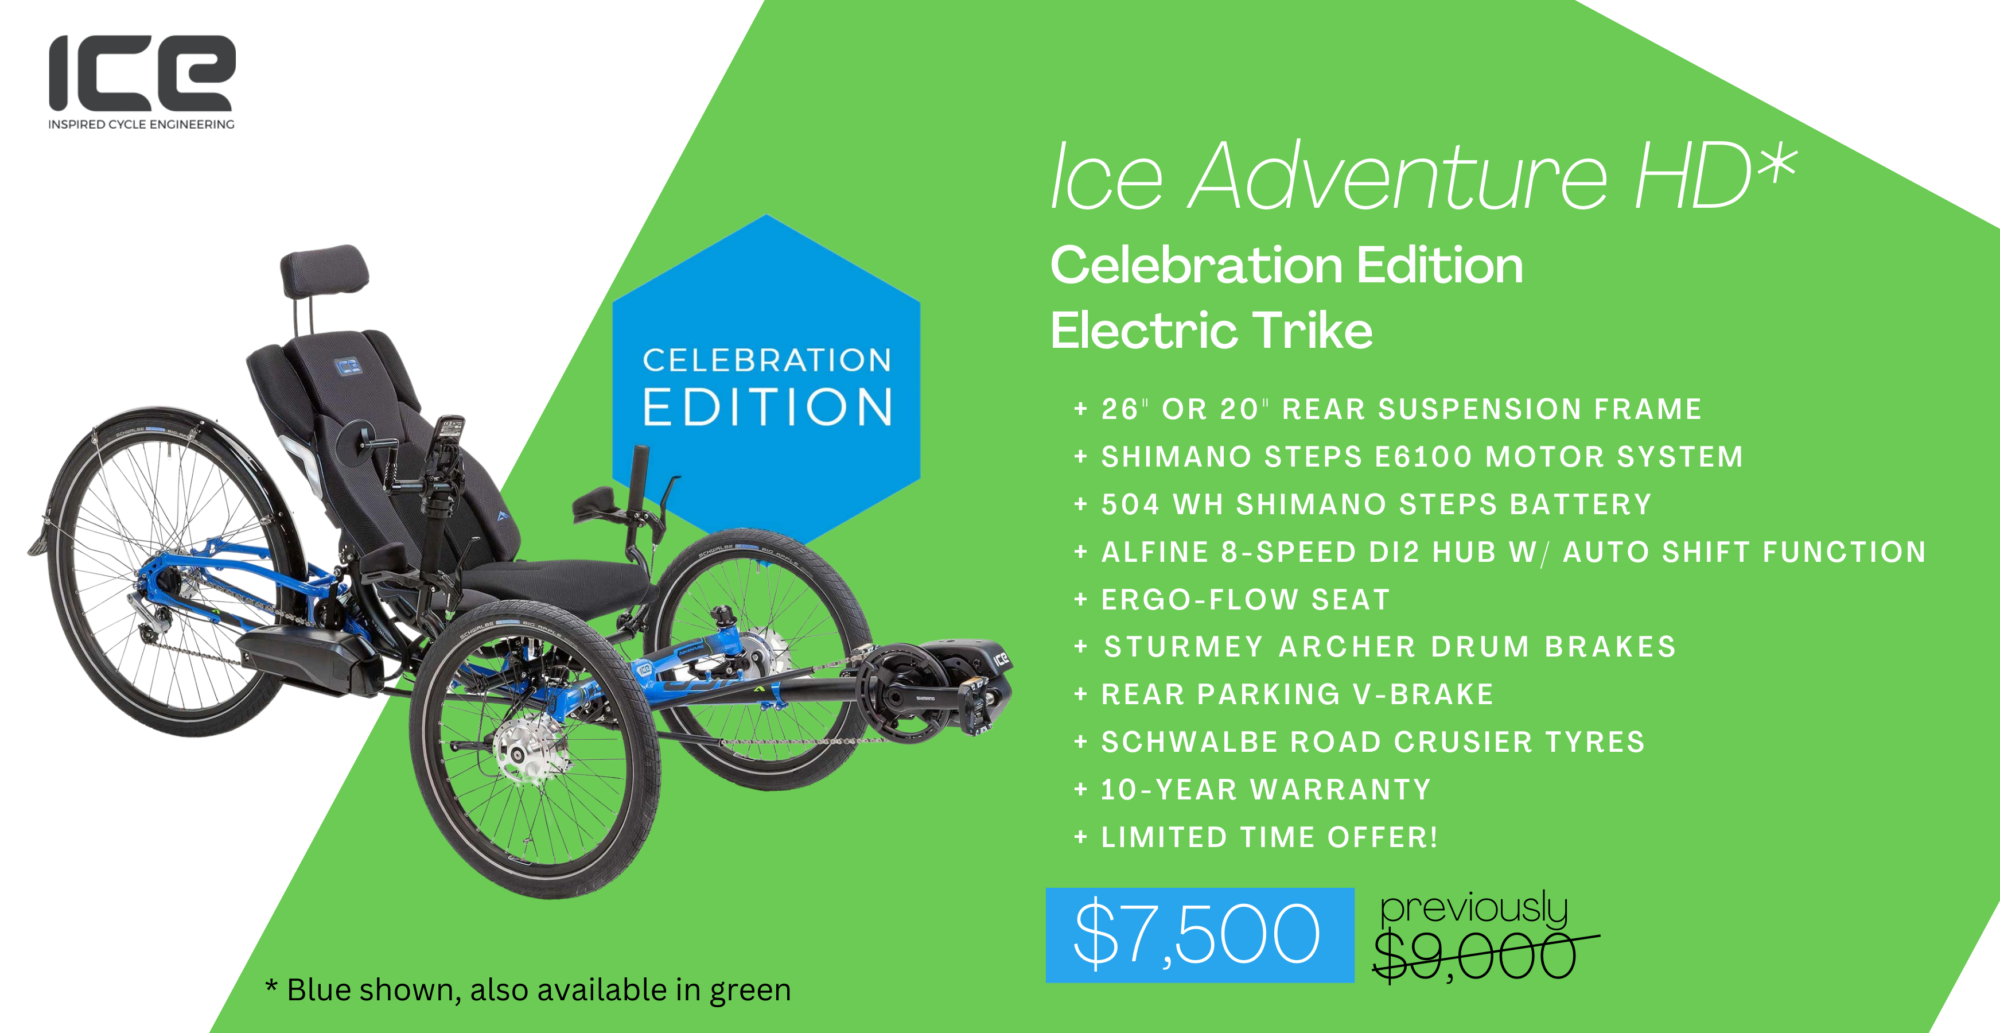 ICE ADVENTURE HD CELEBRATION ELECTRIC TRIKE WAS $9,000 NOW $7,500. CALL US FOR ADDITIONAL SPECS AT (614)478-7777!